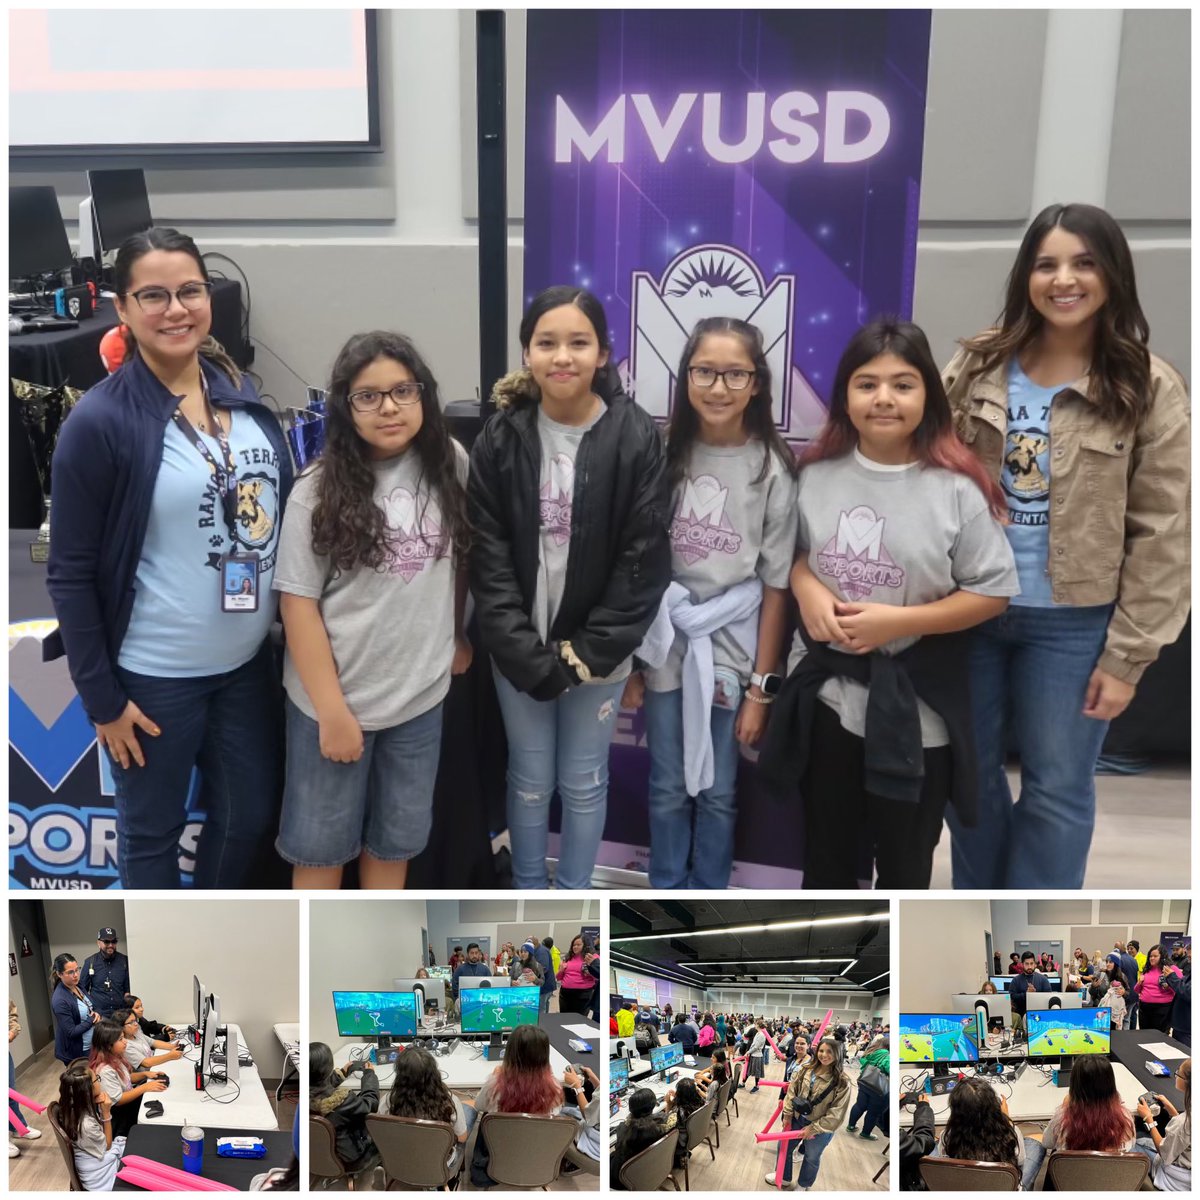 Our Ramona Egaming girls represented at the MVUSD district Mario Kart Egaming Competition. Go Terriers!